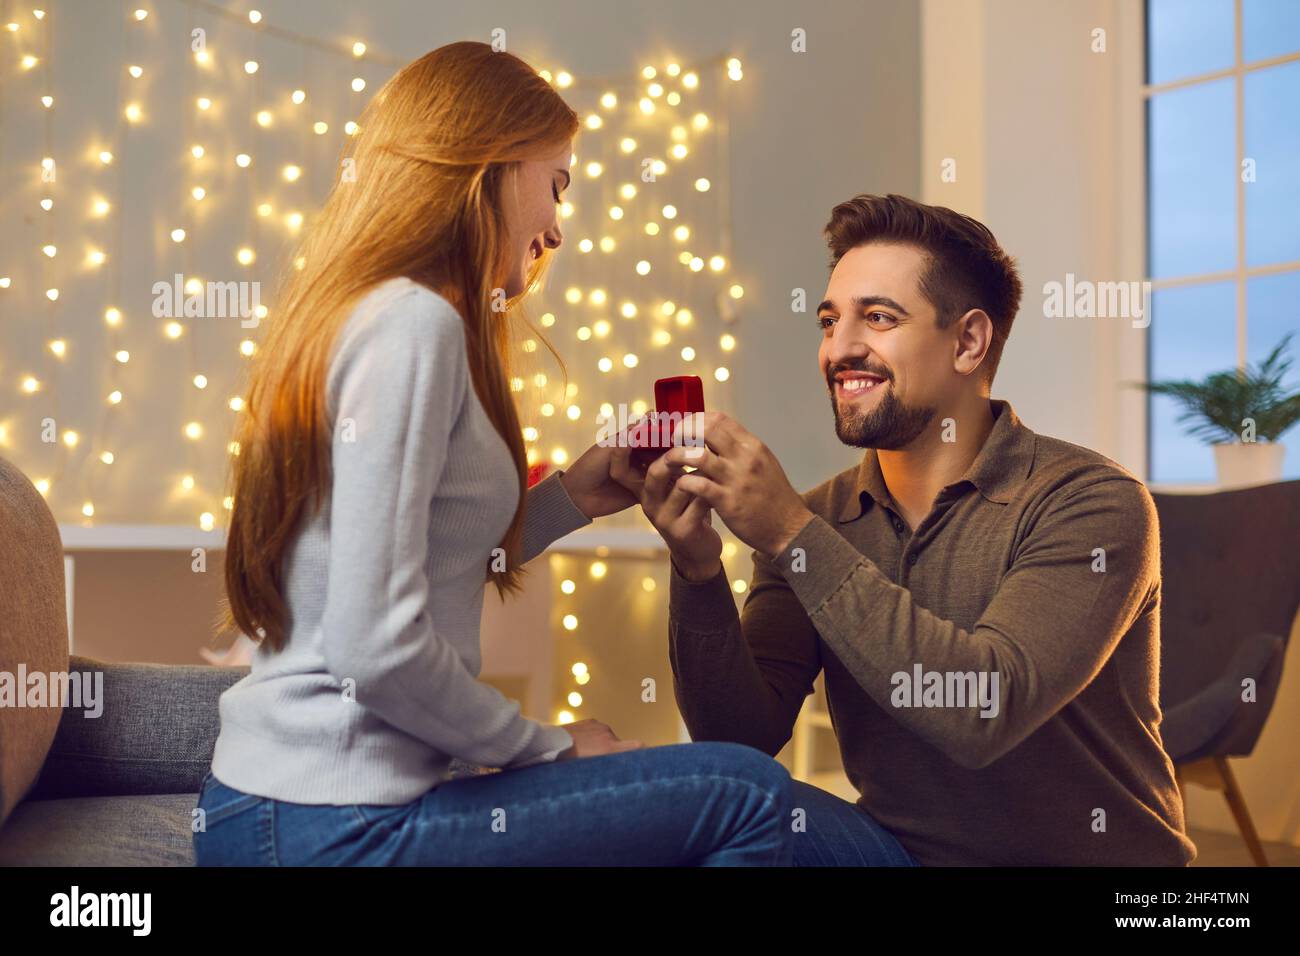 Happy young man in love proposing to his girlfriend and giving her a beautiful ring Stock Photo